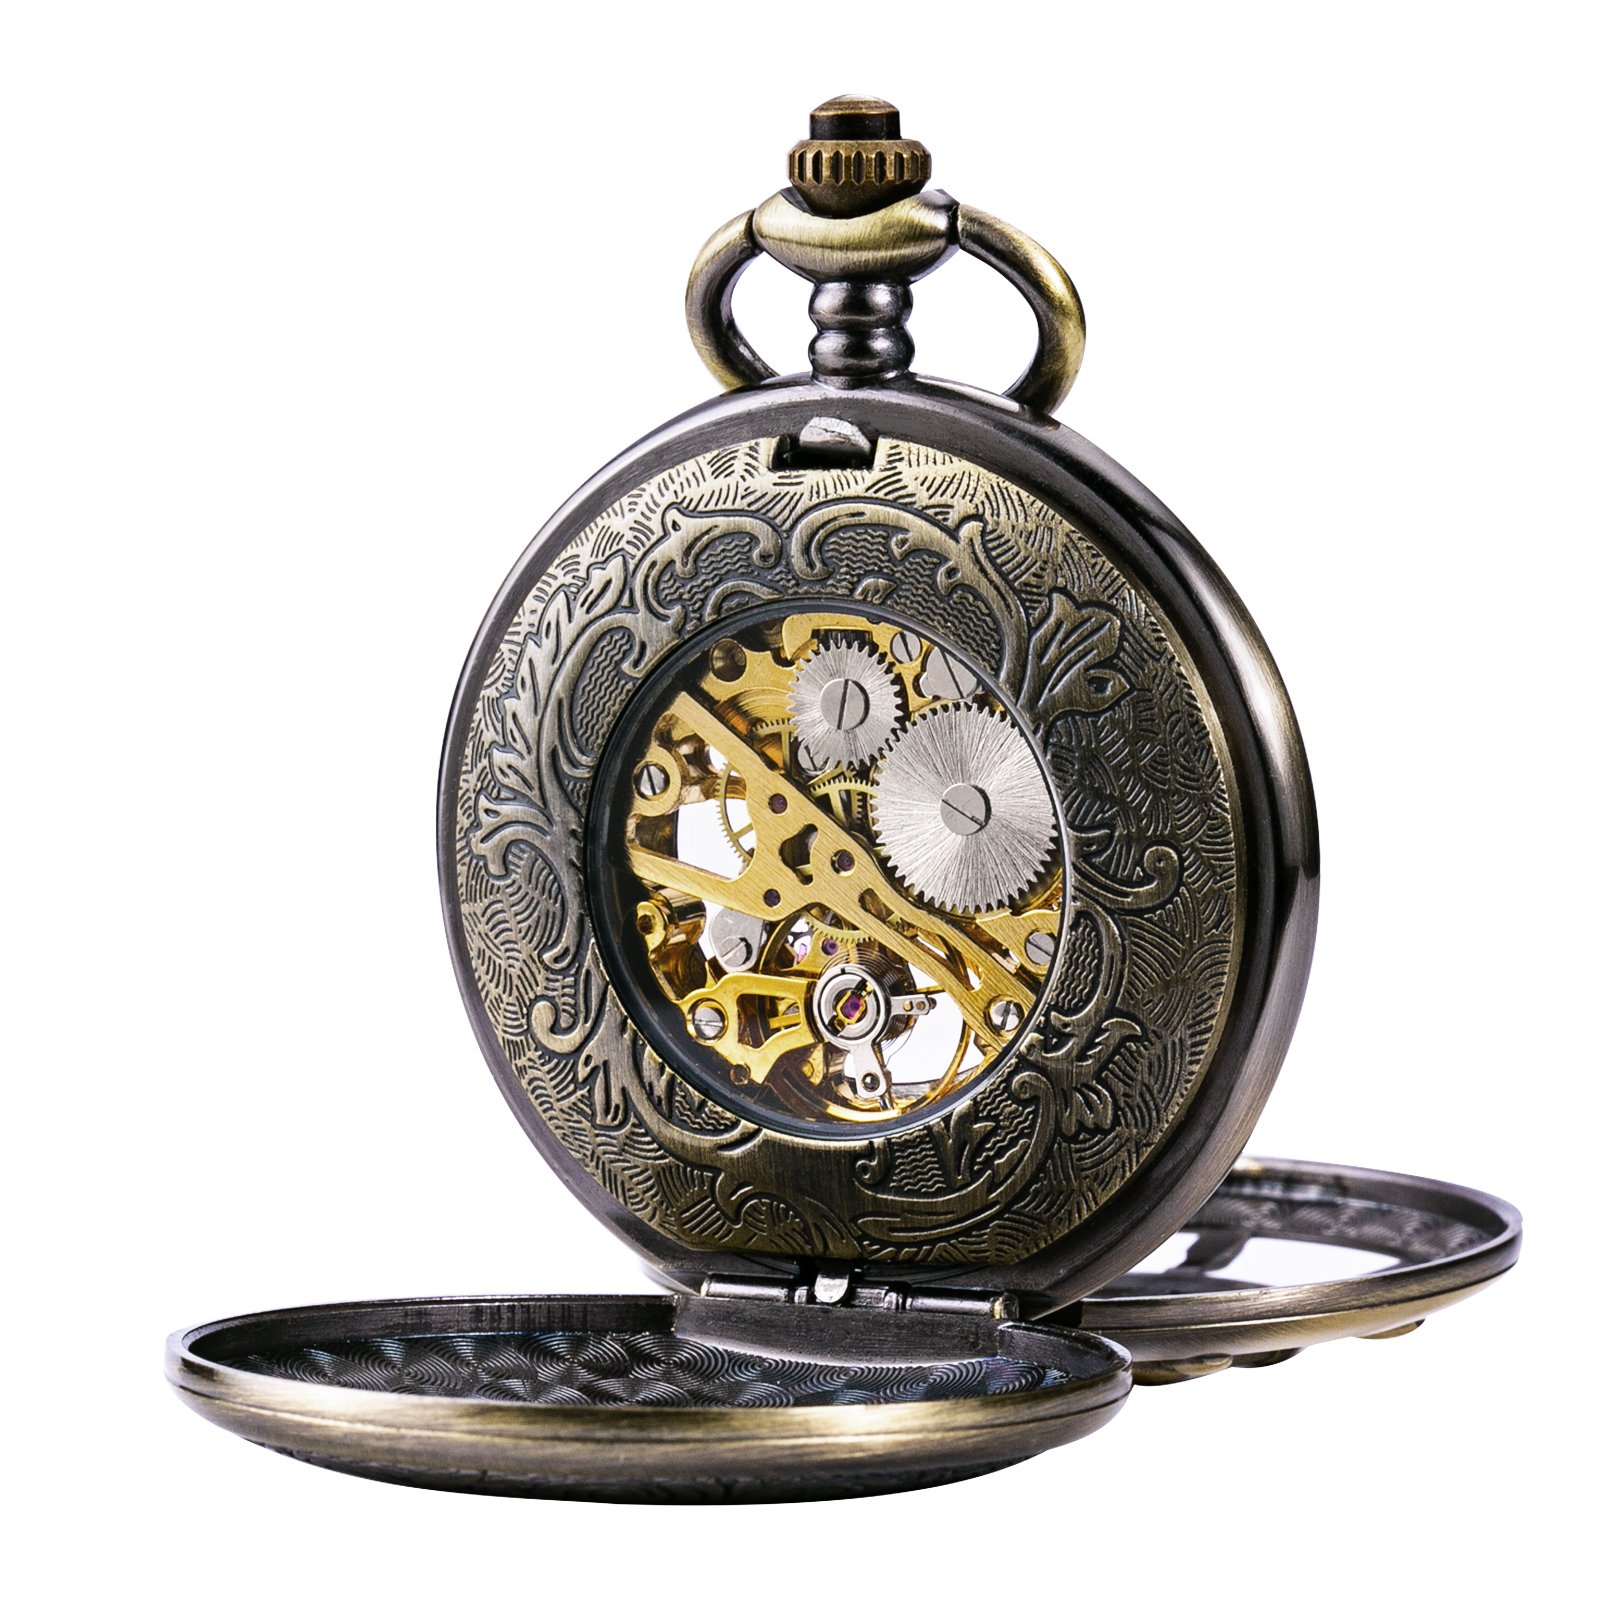 TREEWETO Bronze Double Cover Roman Numerals Dial Skeleton Mens Women Pocket Watch